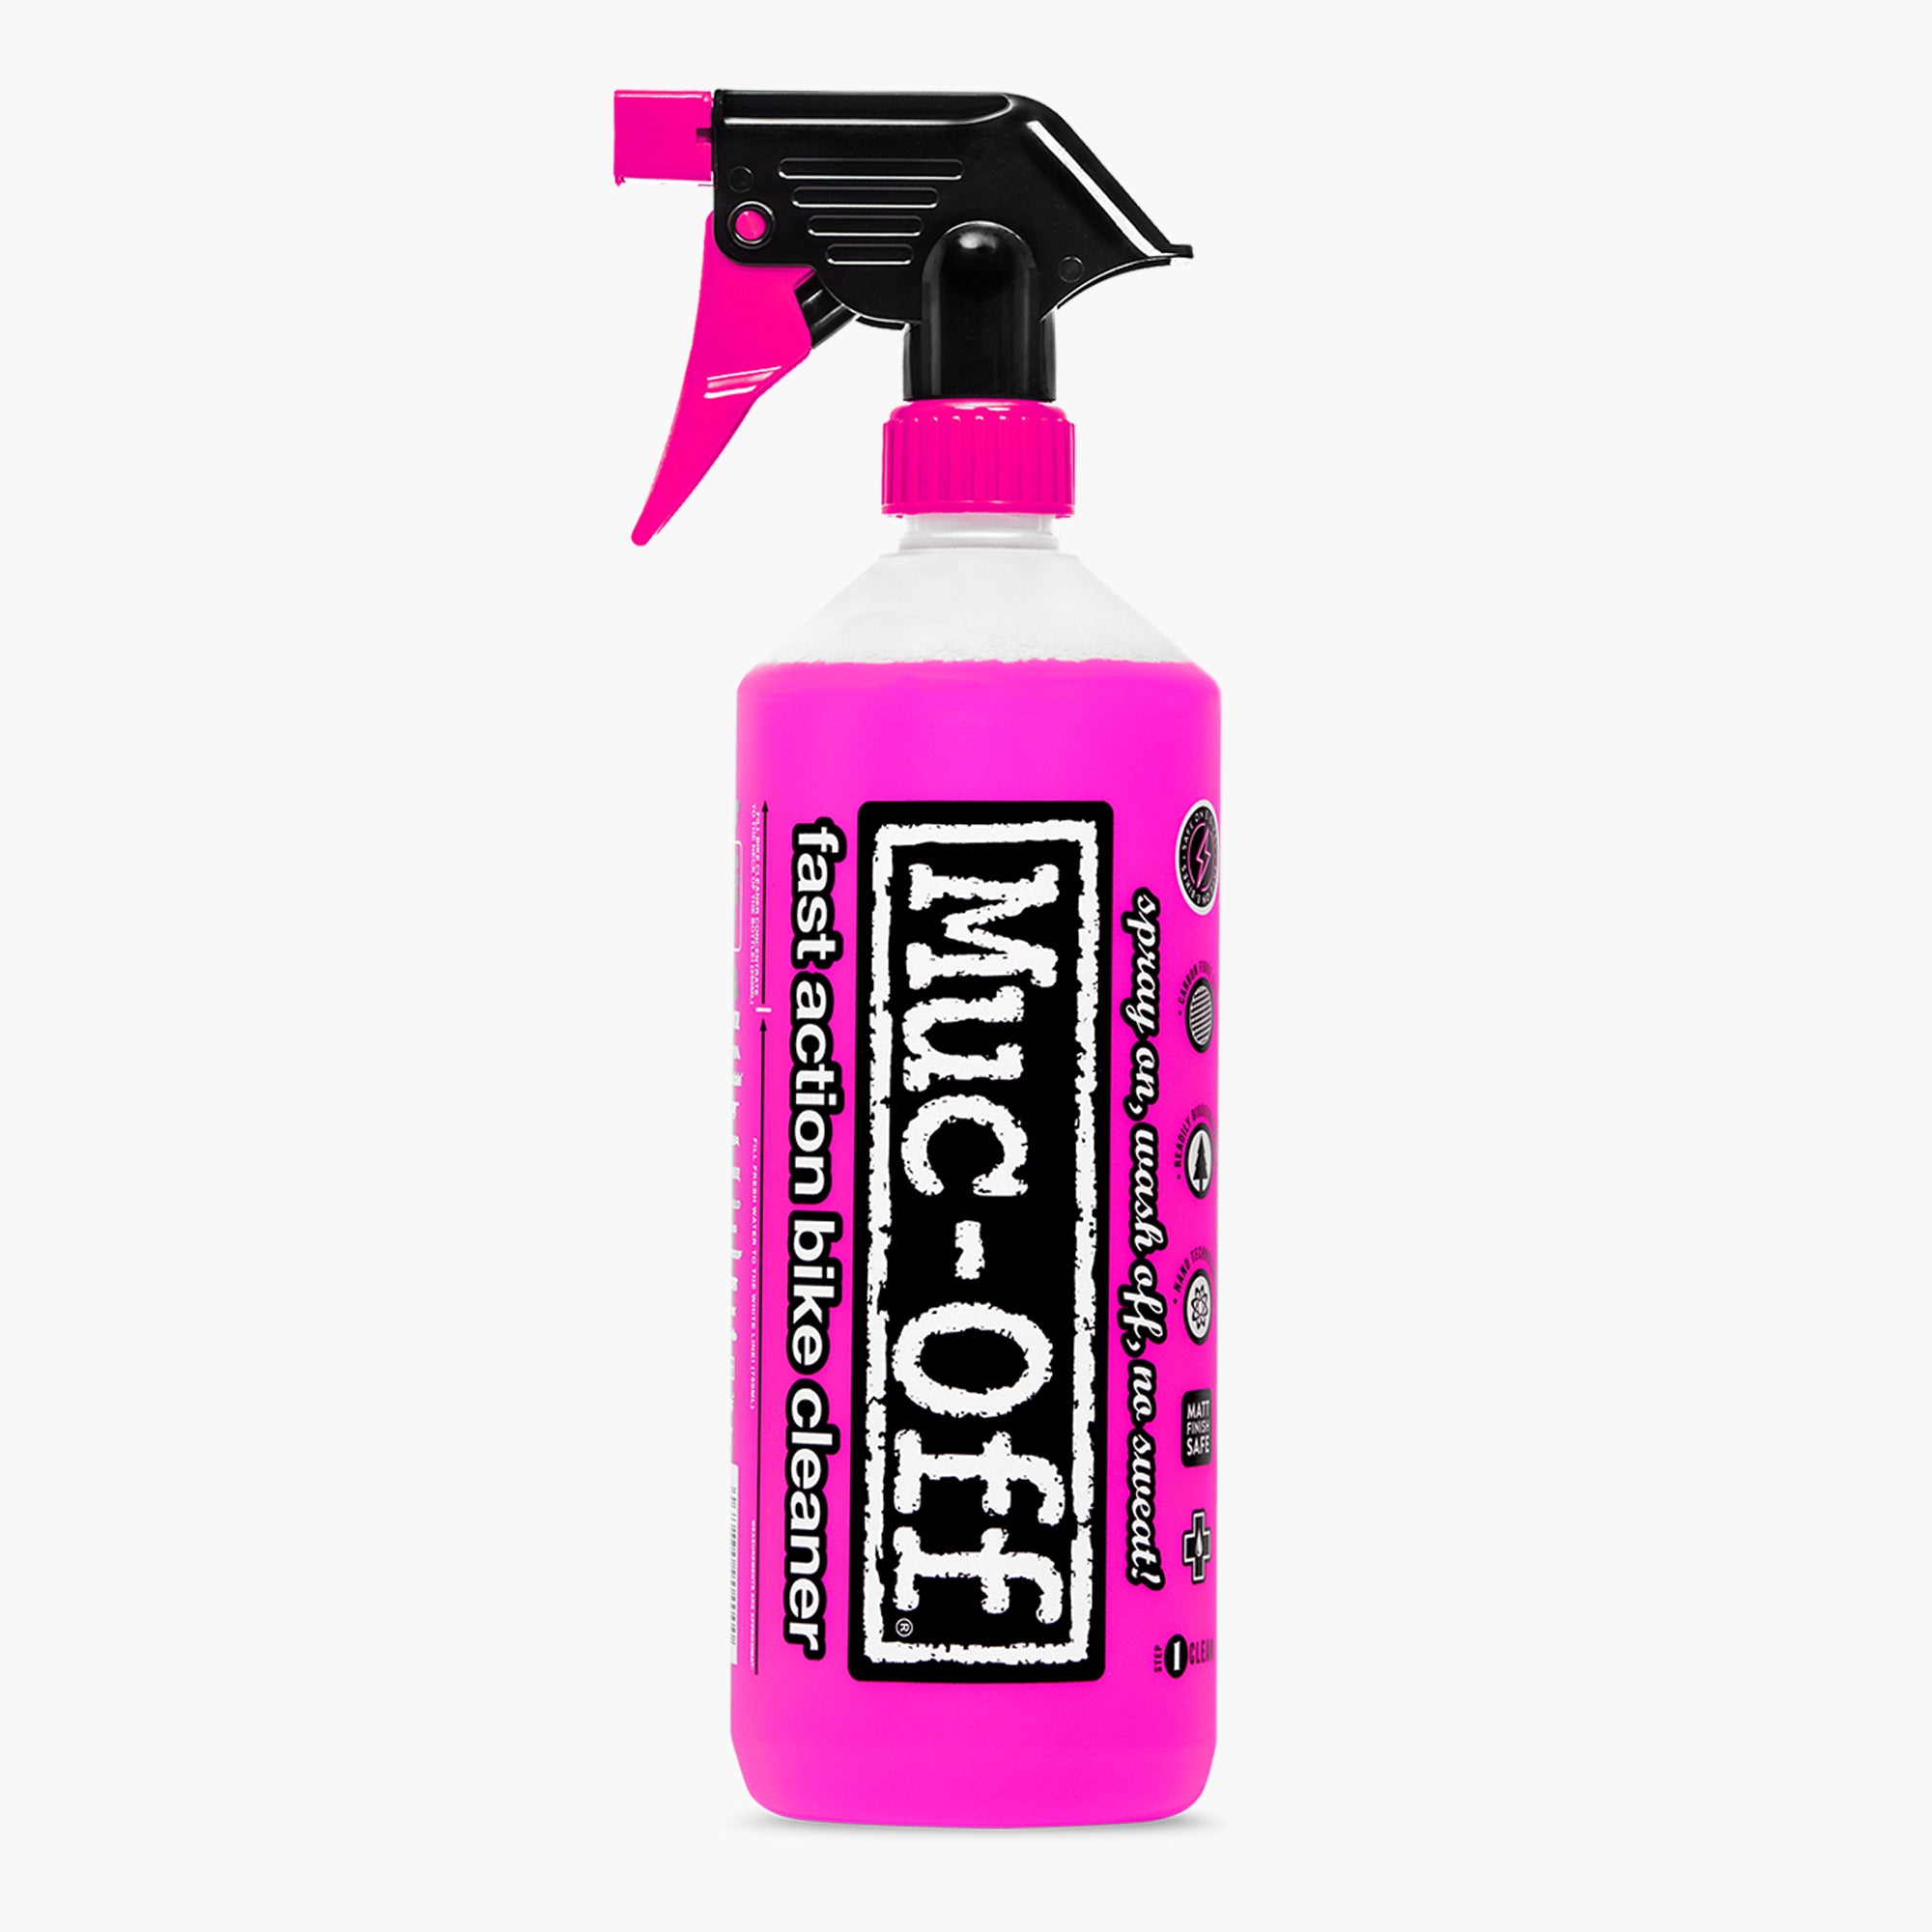 Muc Off 664US Nano-Tech Motorcycle Cleaner, 1 Liter - Fast-Action,  Biodegradable Motorbike Cleaning Spray - Safe On All Surfaces and All Types  of